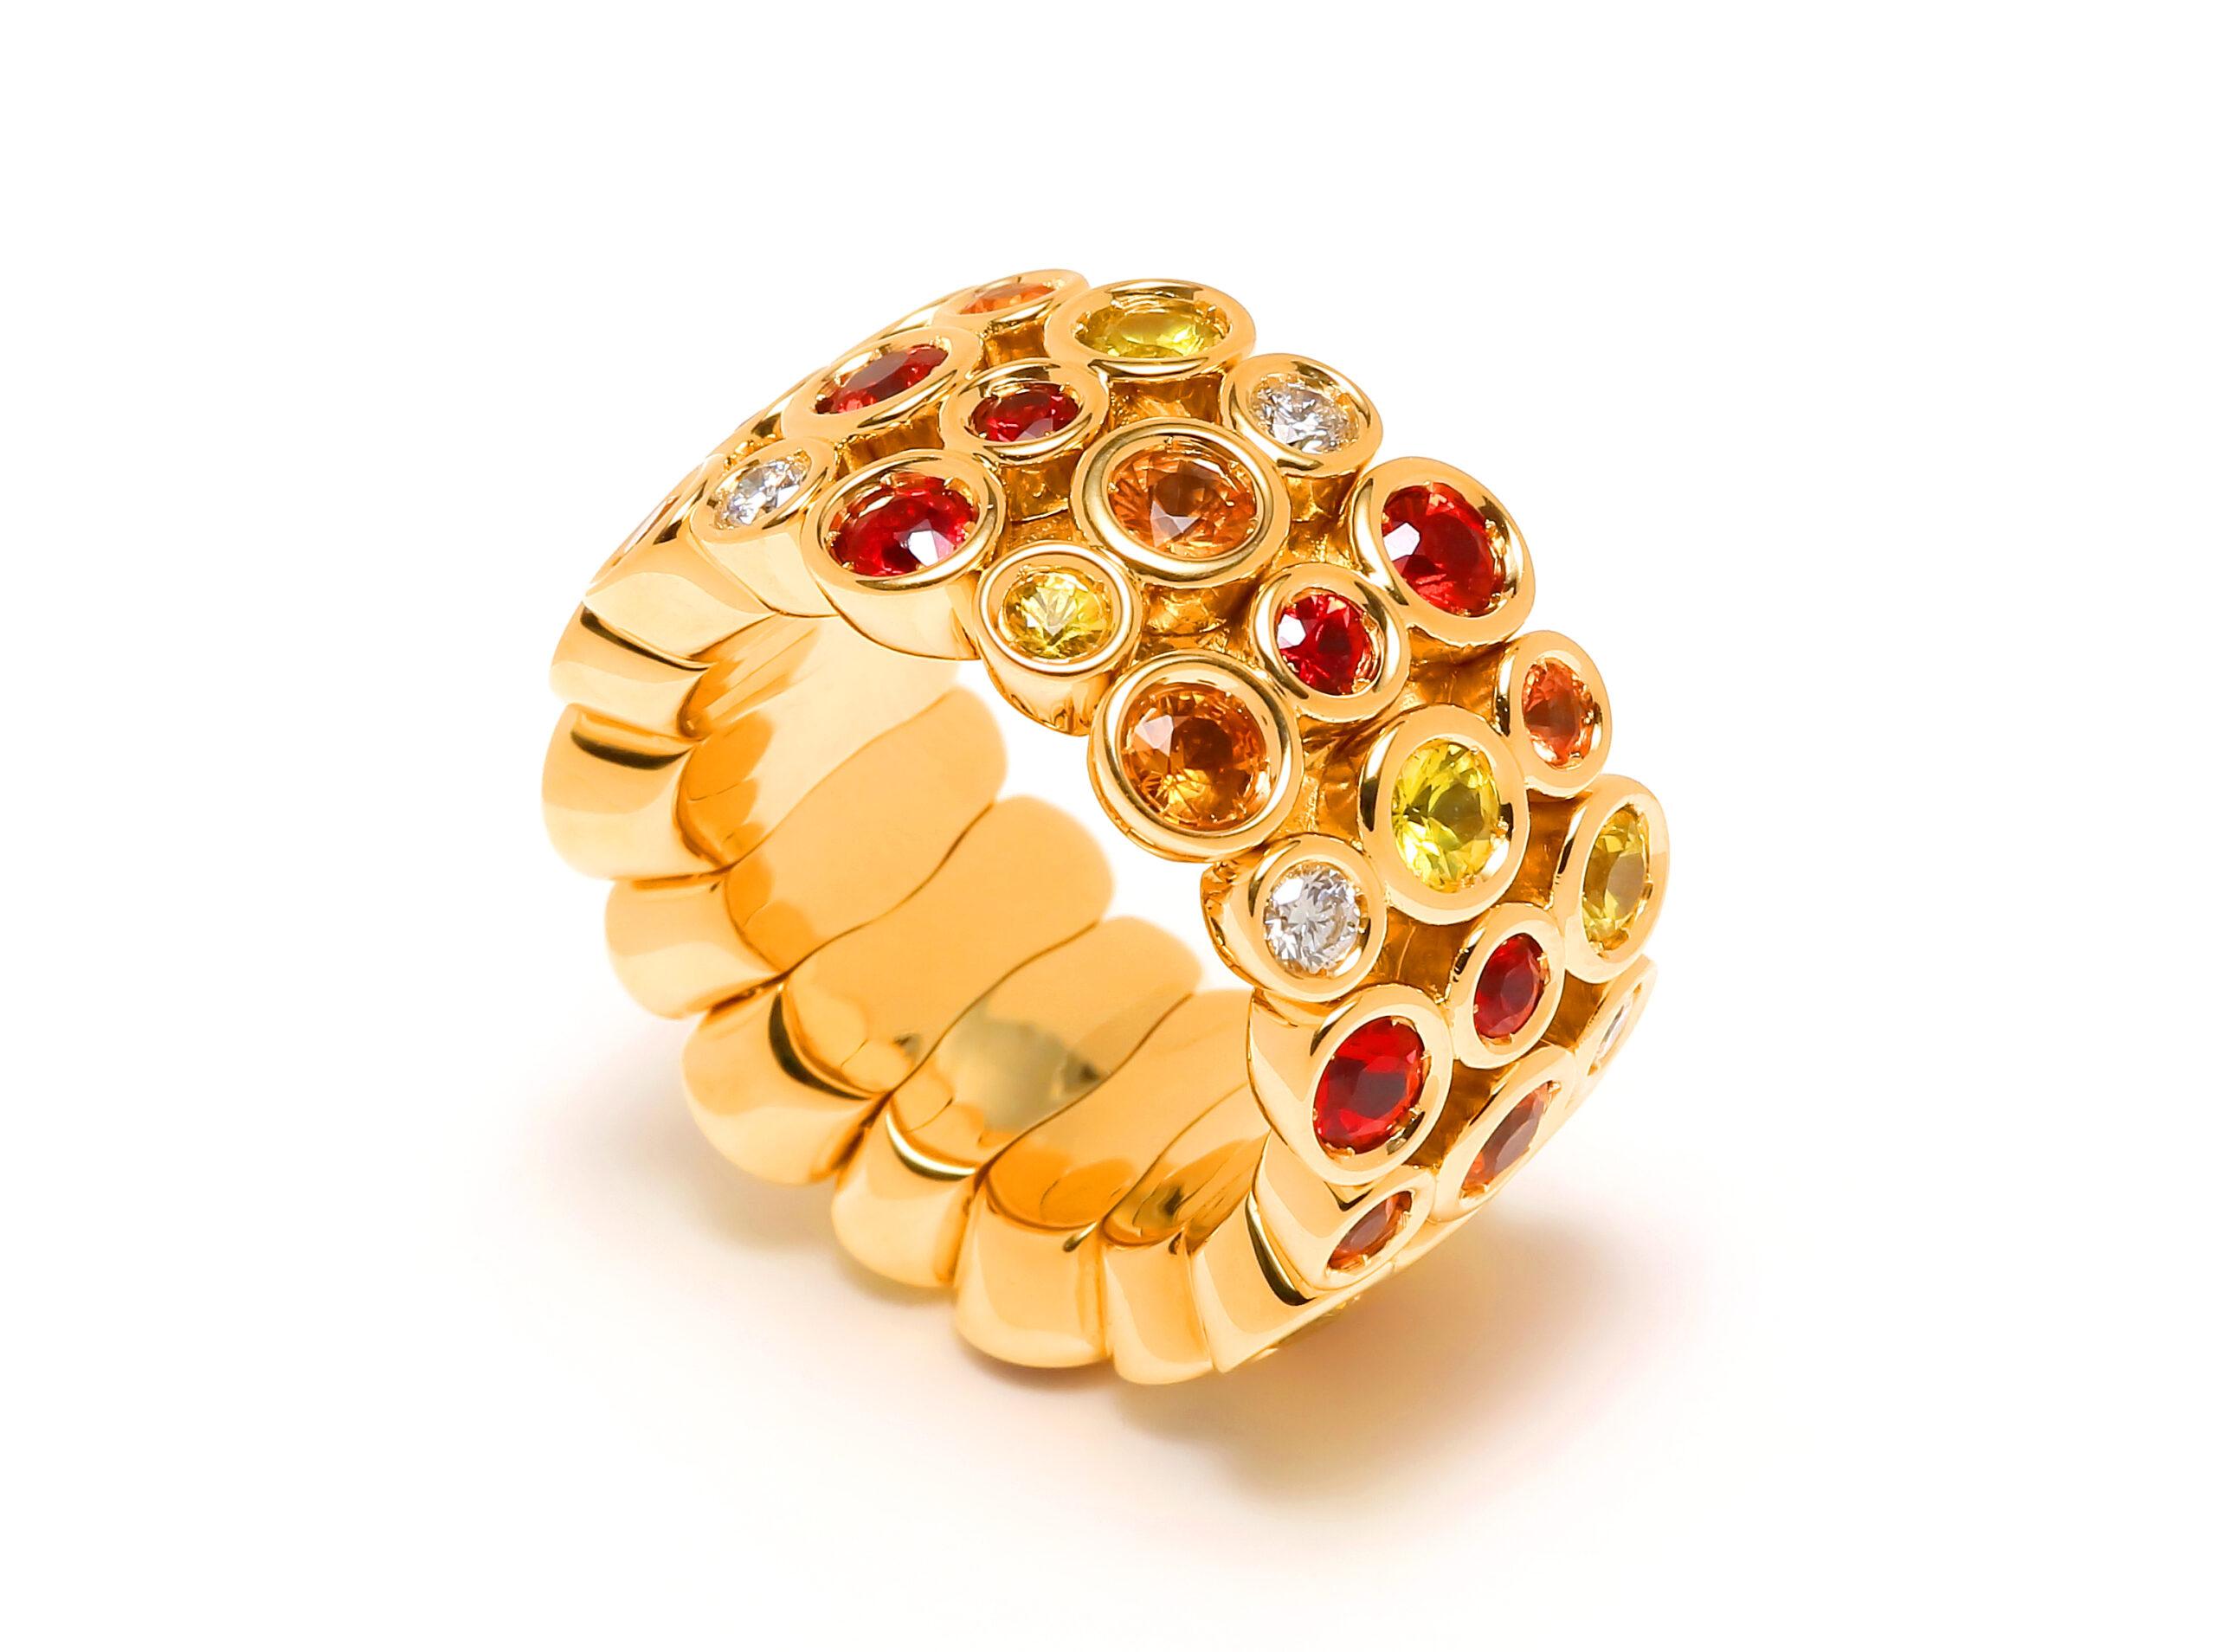 Multi Color Sunset Fire Eternity Patterns Ring

Red Ruby Orange Yellow Sapphire Diamond Eternity Band 18 Karat Yellow Gold Ring 

Jewels inspired by the colourful Art Deco movement. Lively designs and colorful Interpretations in a triple row